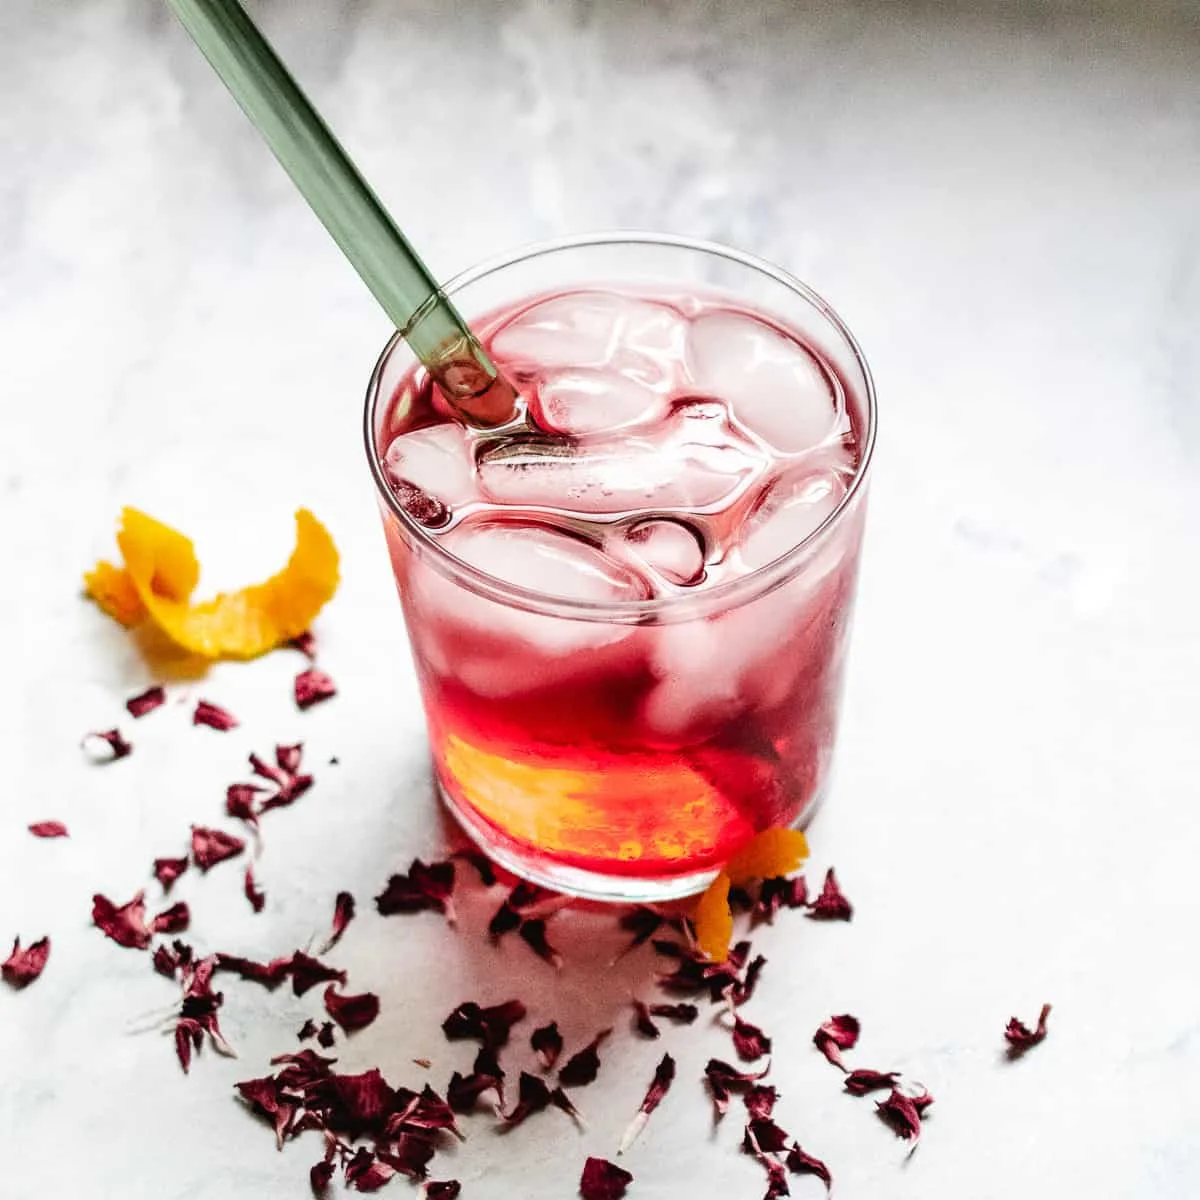 Iced hibiscus tea in a glass.